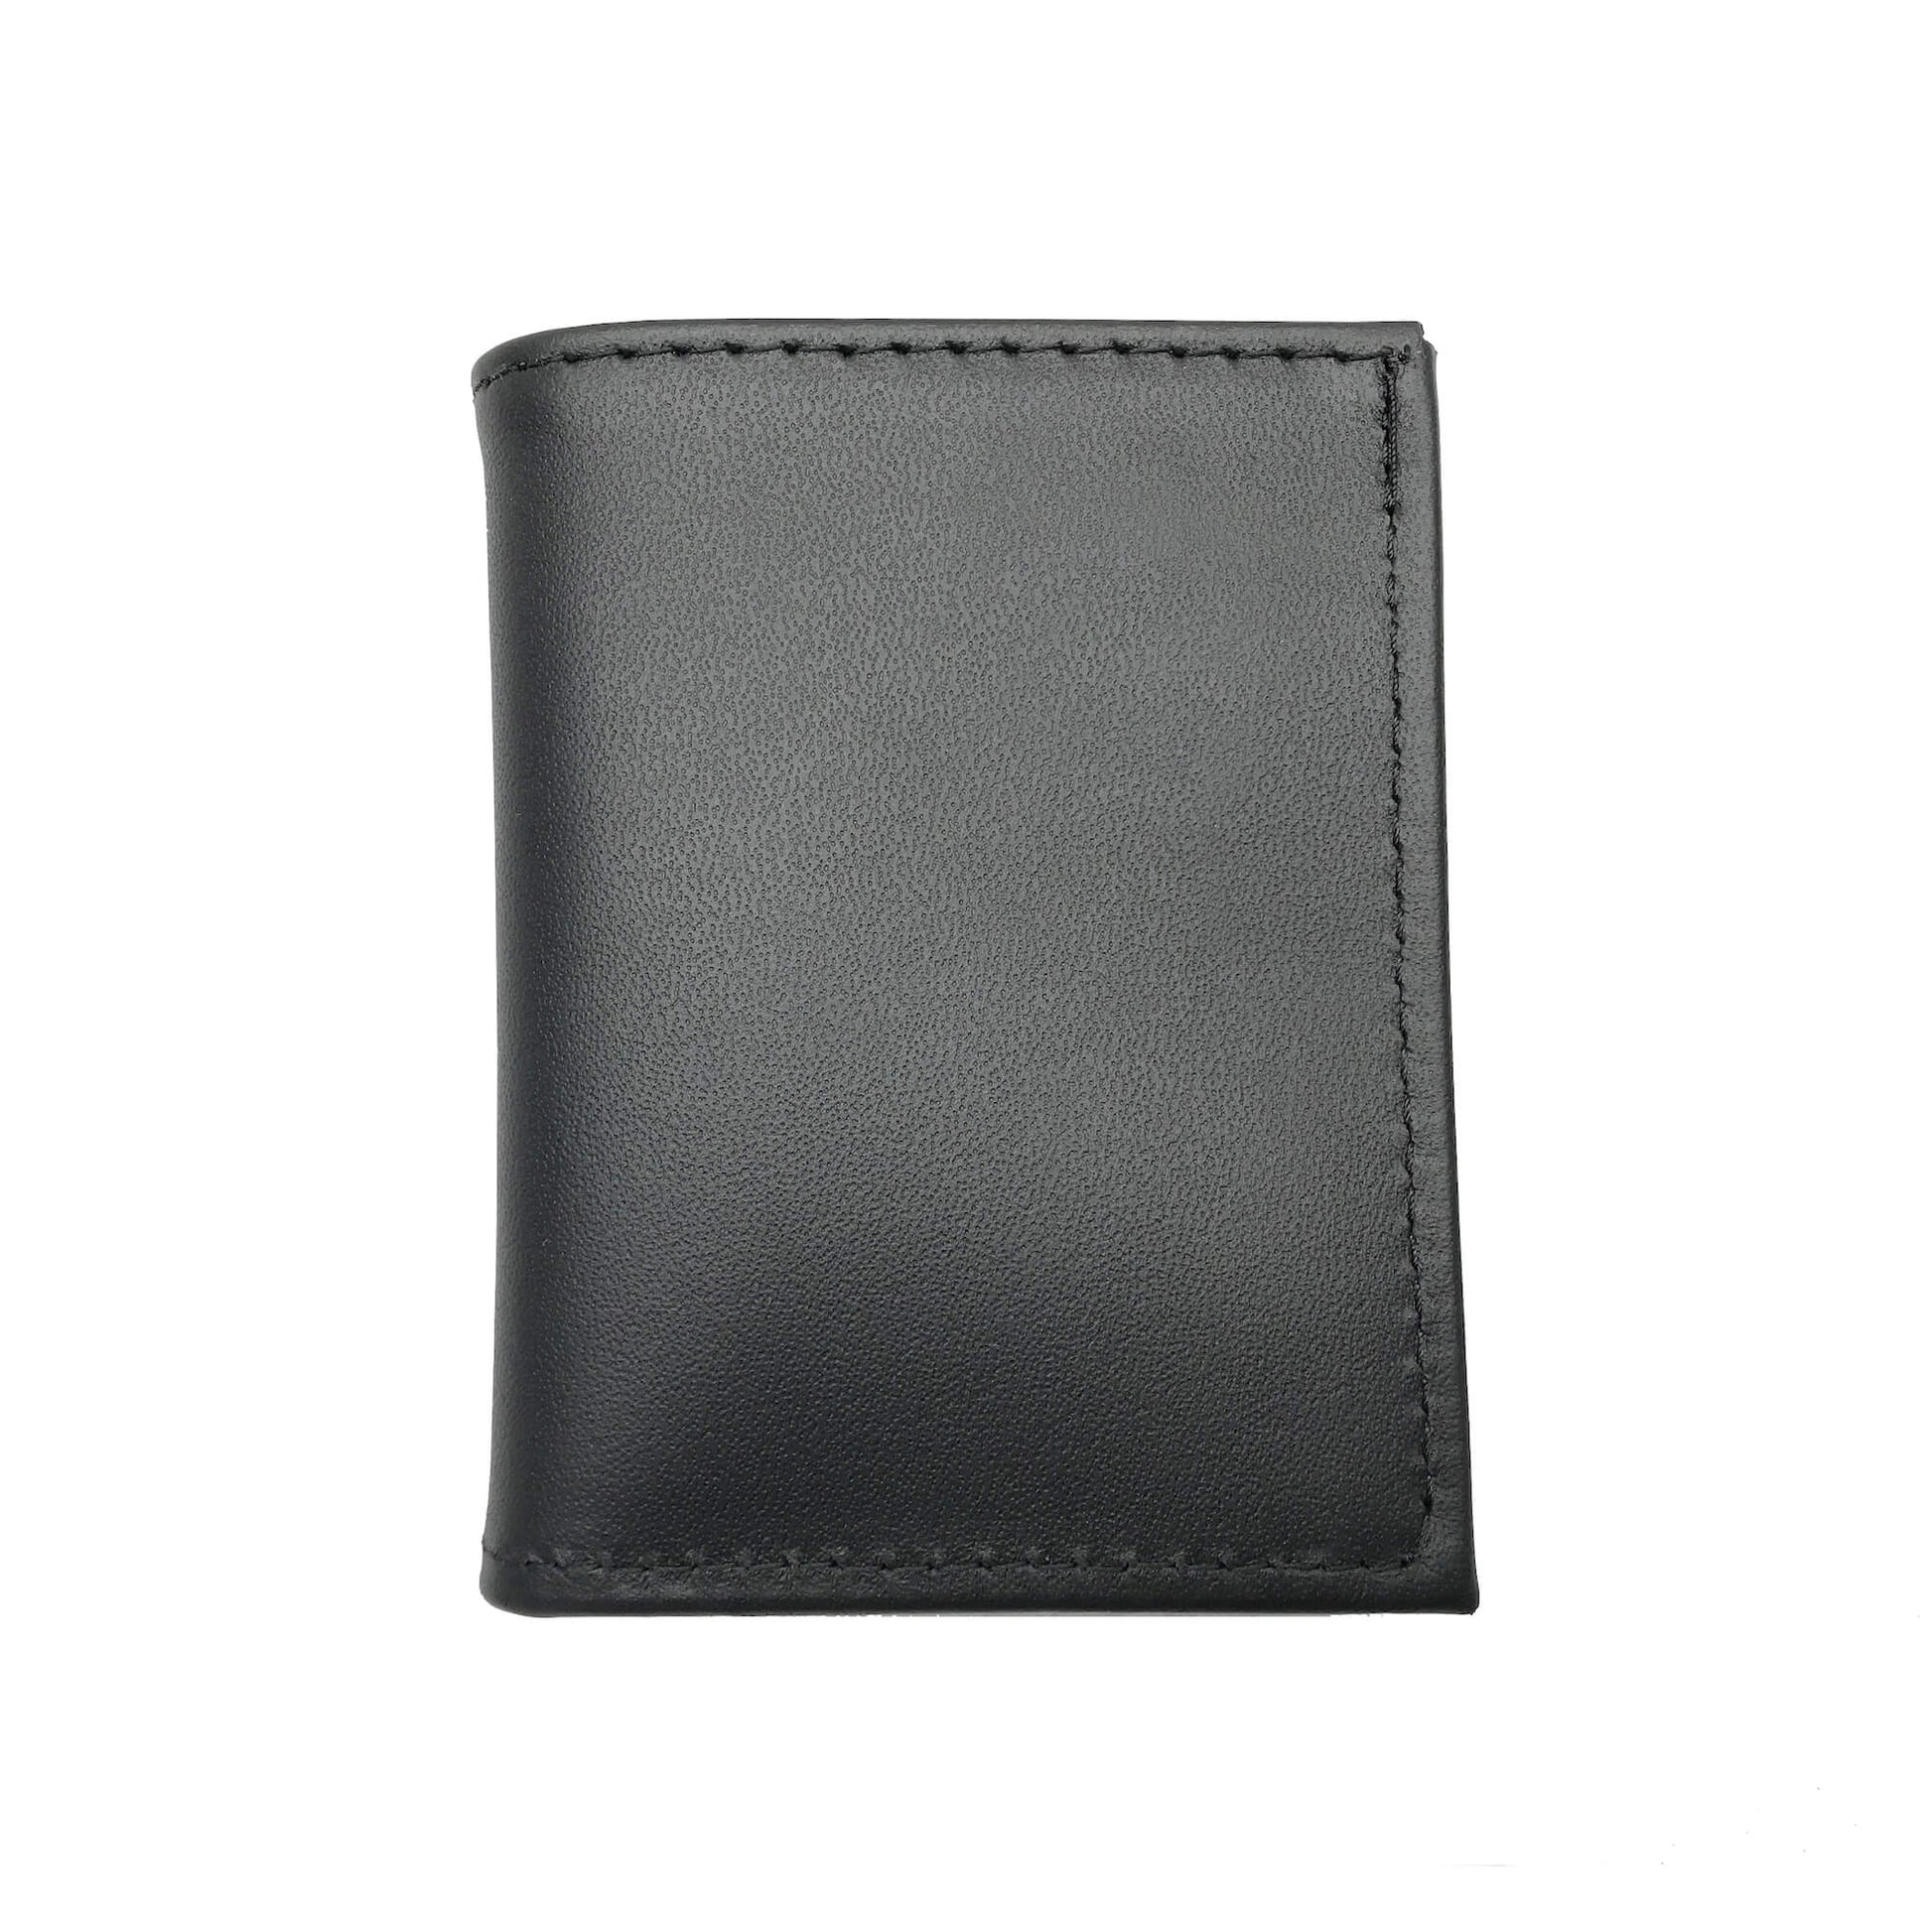 New York Police Department (NYPD) Sergeant Bifold Hidden Badge Wallet-Perfect Fit-911 Duty Gear USA